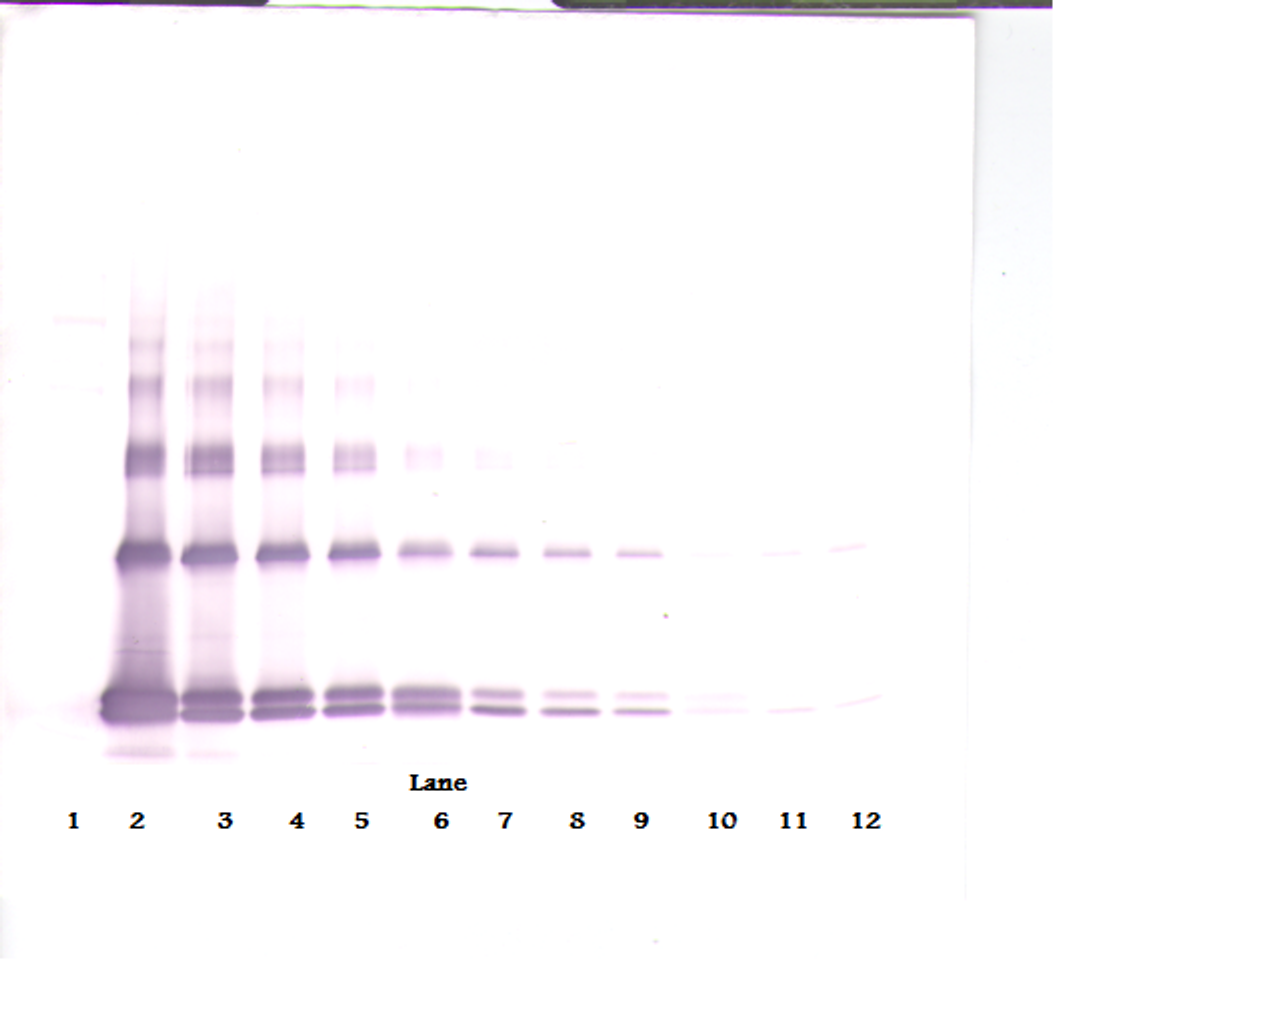 To detect hIL-33 by Western Blot analysis this antibody can be used at a concentration of 0.1 - 0.2 ug/ml. Used in conjunction with compatible secondary reagents the detection limit for recombinant hIL-33 is 1.5 - 3.0 ng/lane, under either reducing or non-reducing conditions.